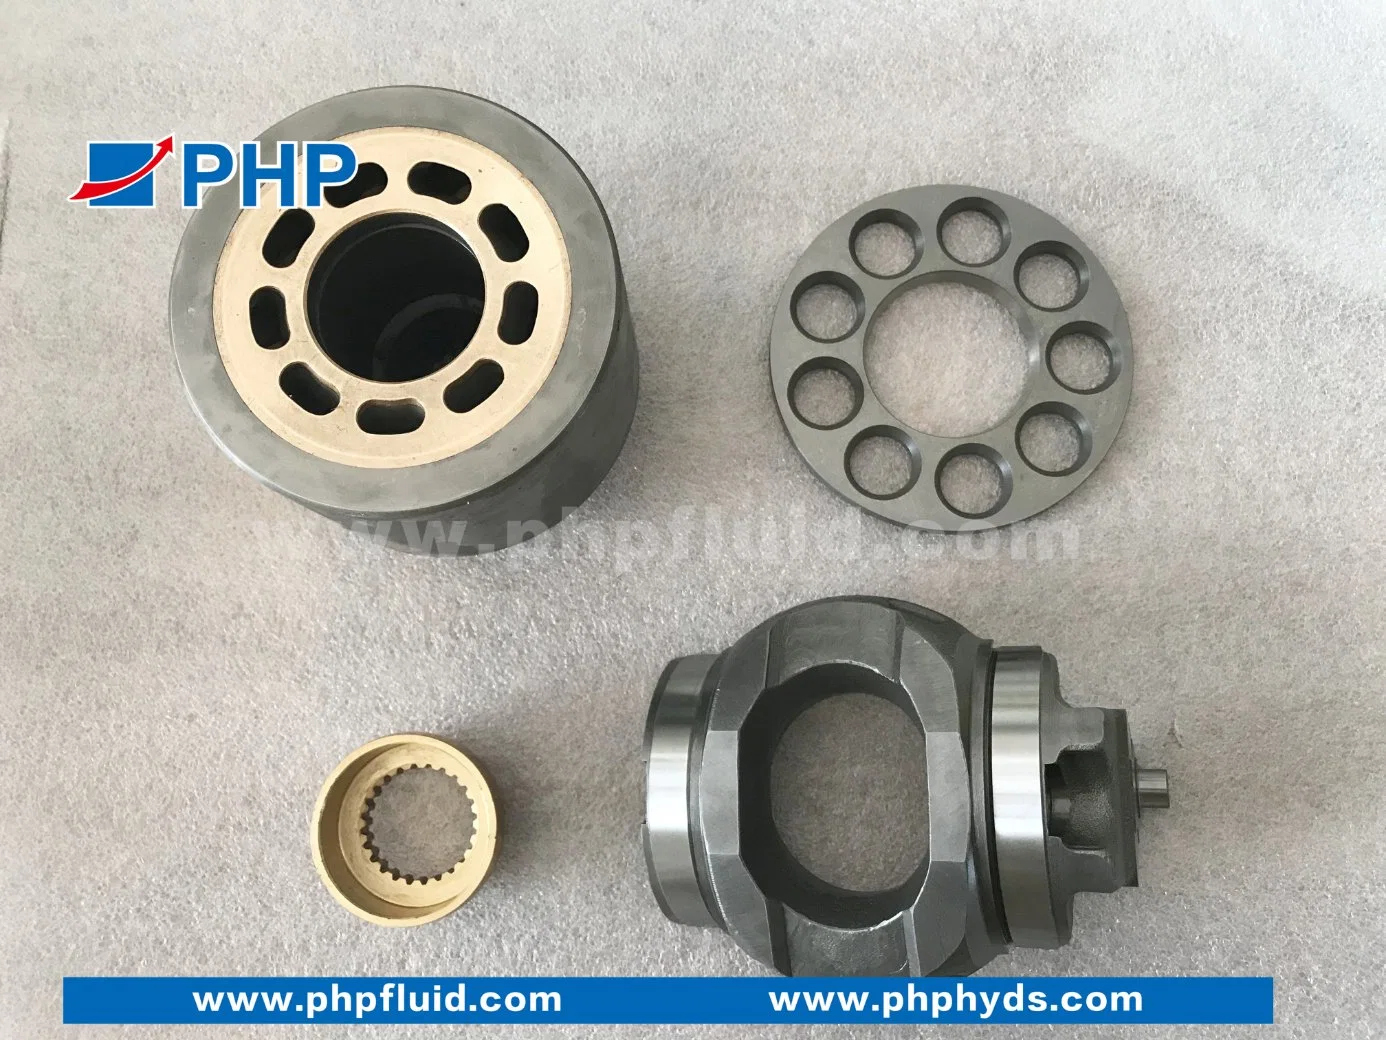 Rexroth Replacement A4vg90 Hydraulic Pump Parts for Concrete Mixer Truck